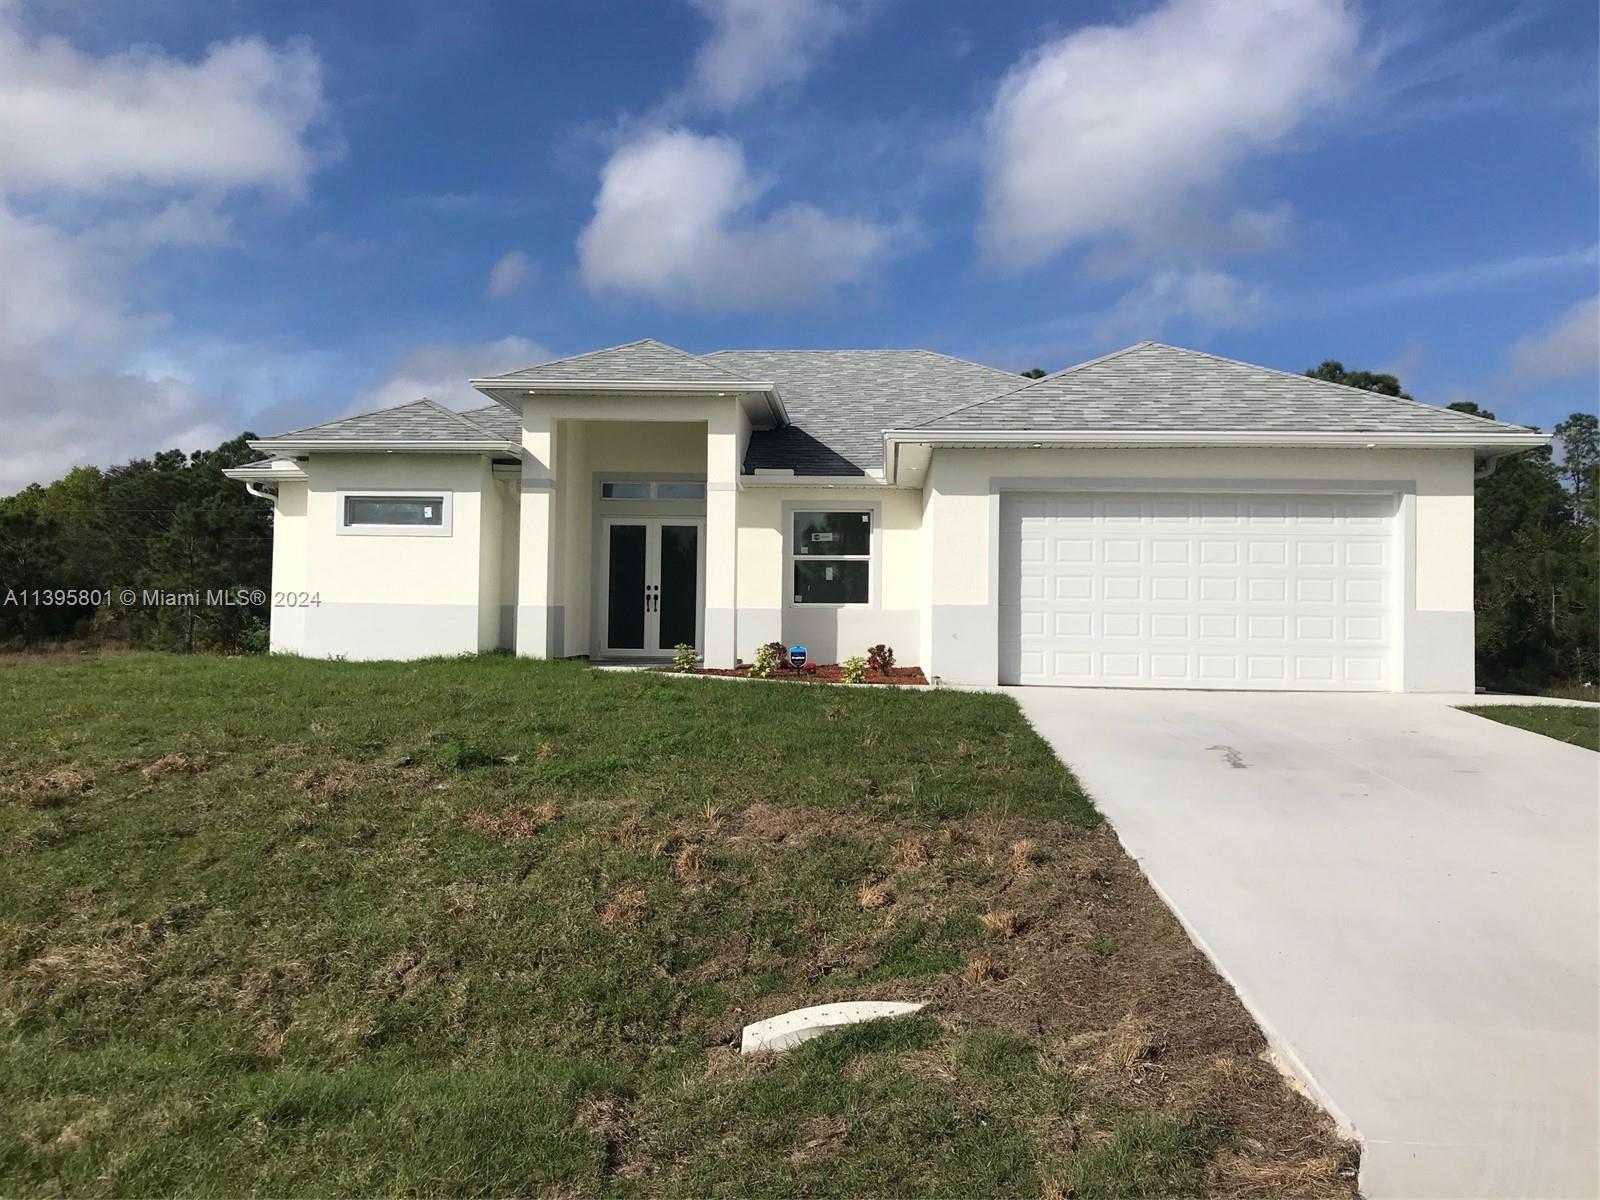 Photo of 1413 Johns Ave in Lehigh Acres, FL